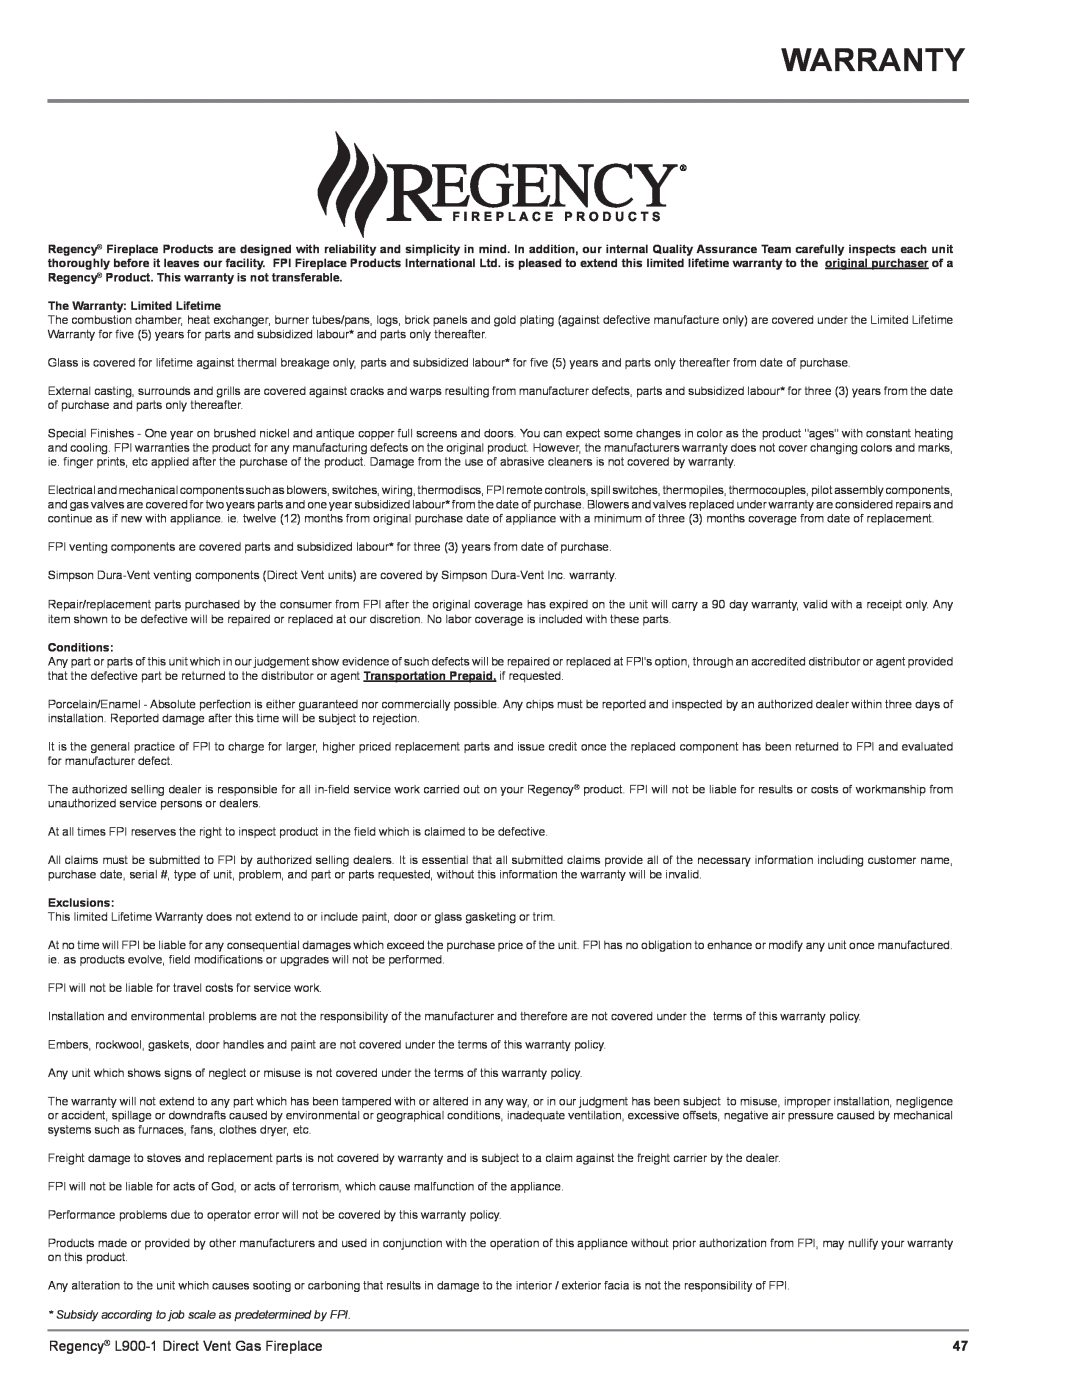 Regency L900-1 installation manual The Warranty: Limited Lifetime, Conditions, Exclusions 